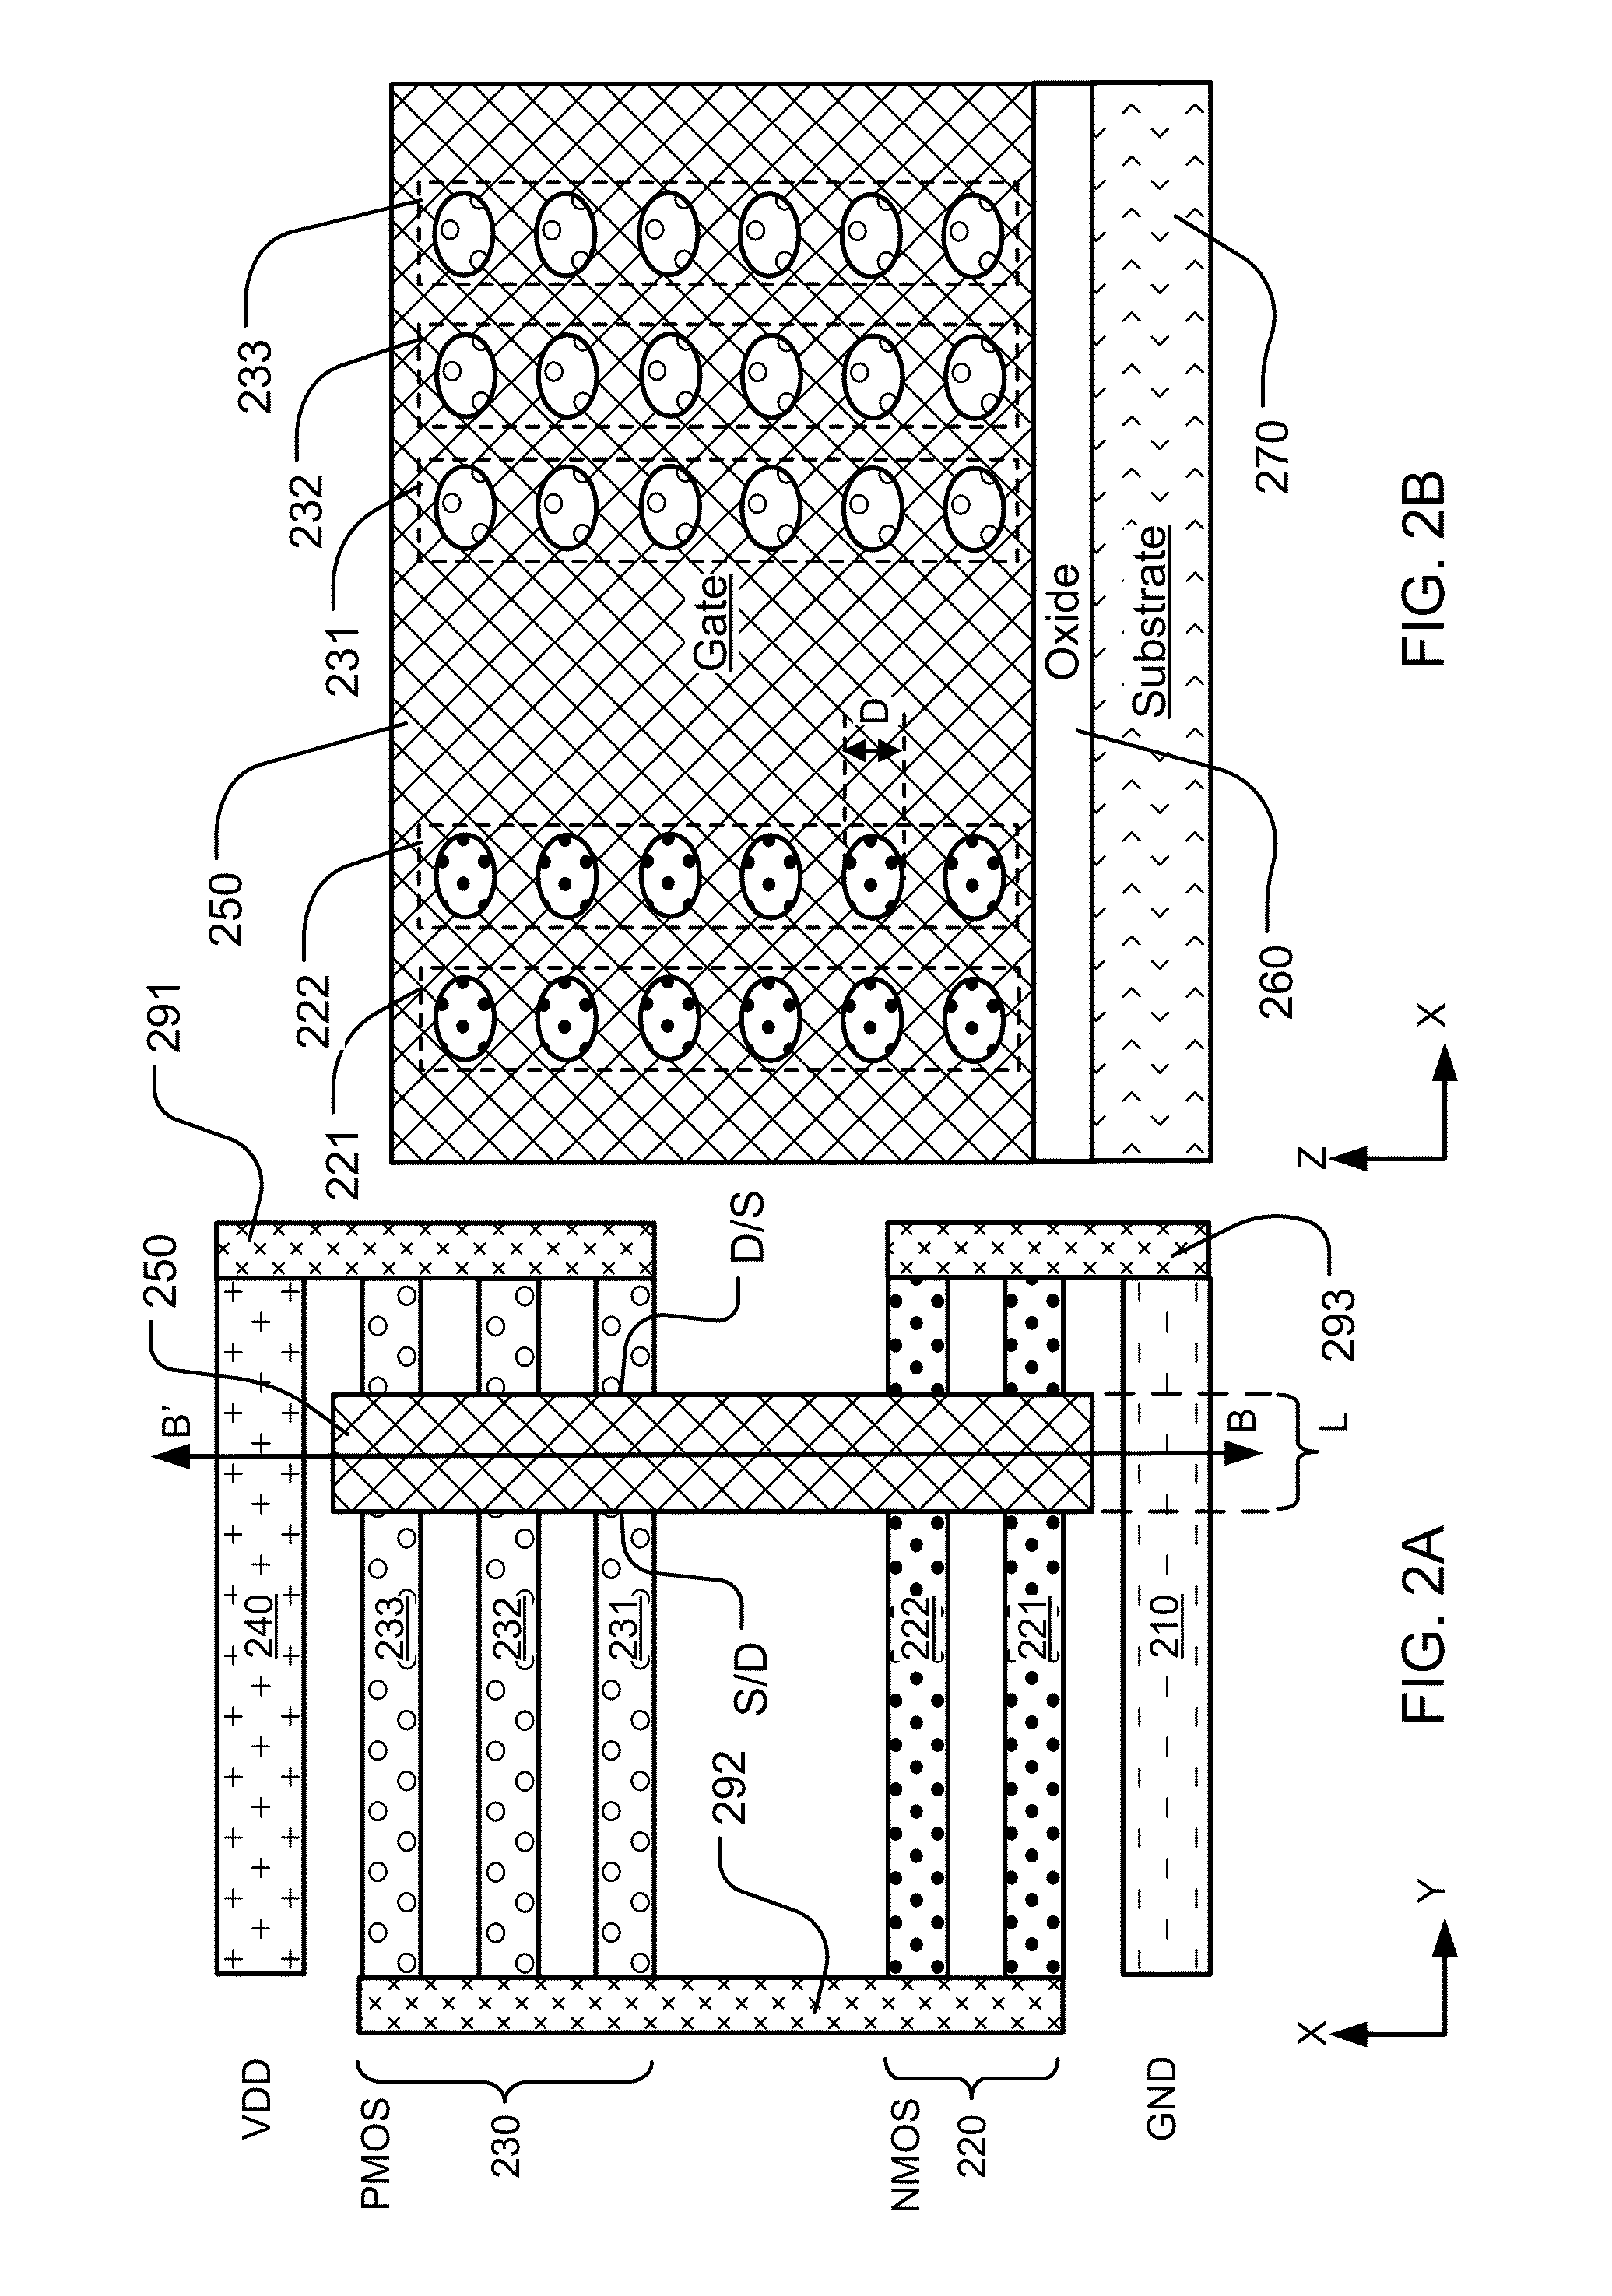 Cells having transistors and interconnects including nanowires or 2D material strips